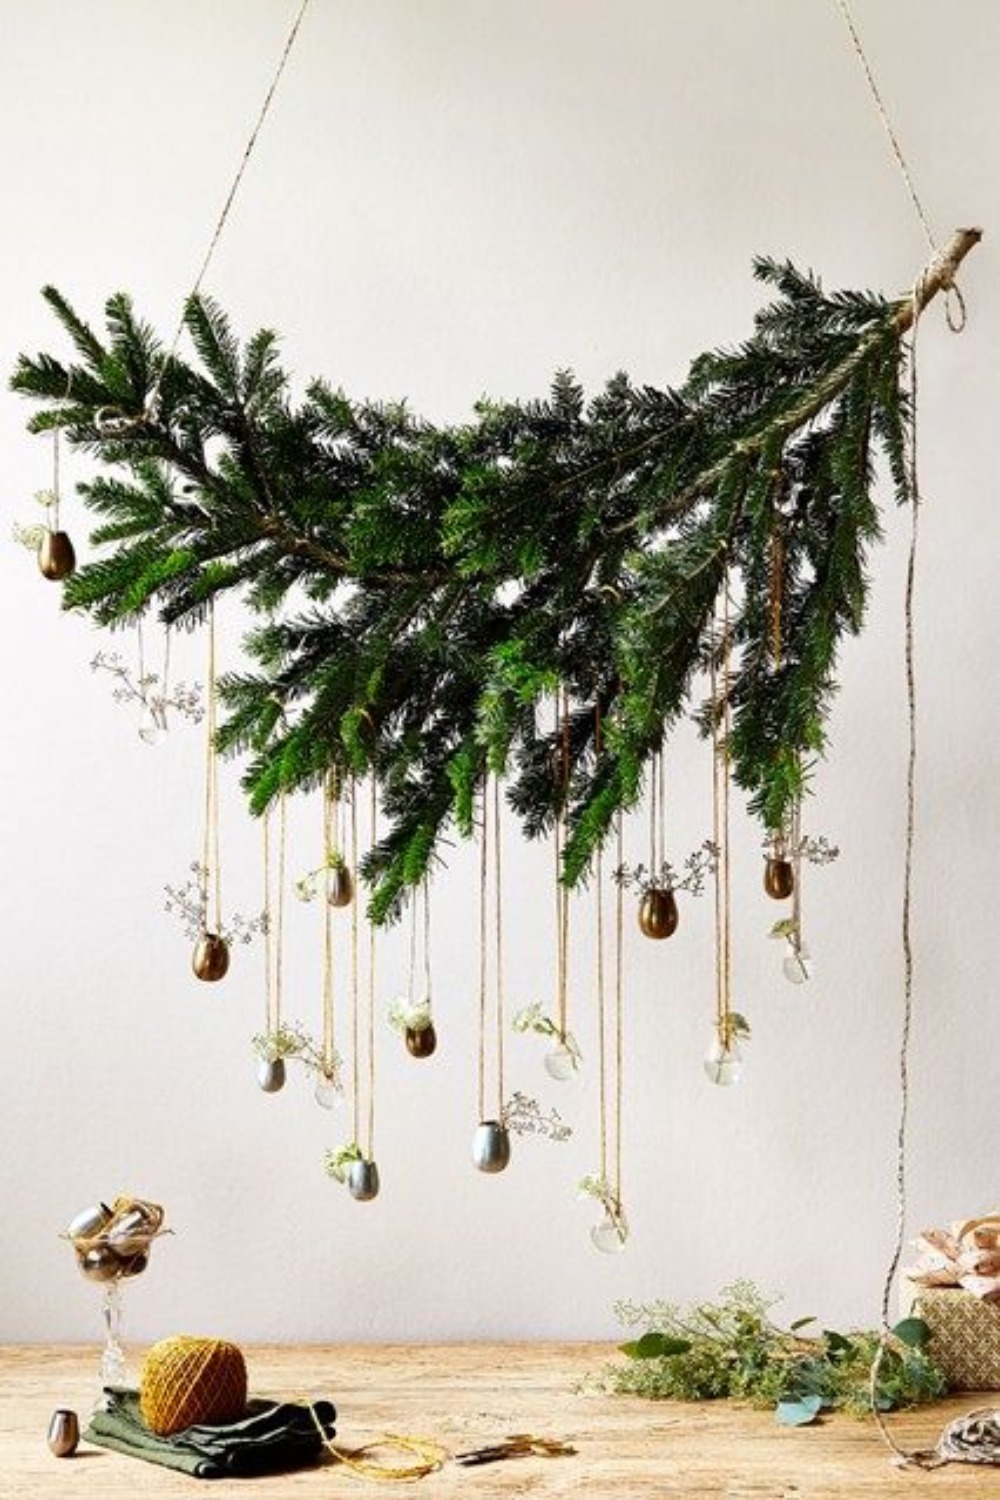 Five Christmas Tree Alternatives - #MovewithGreens 1